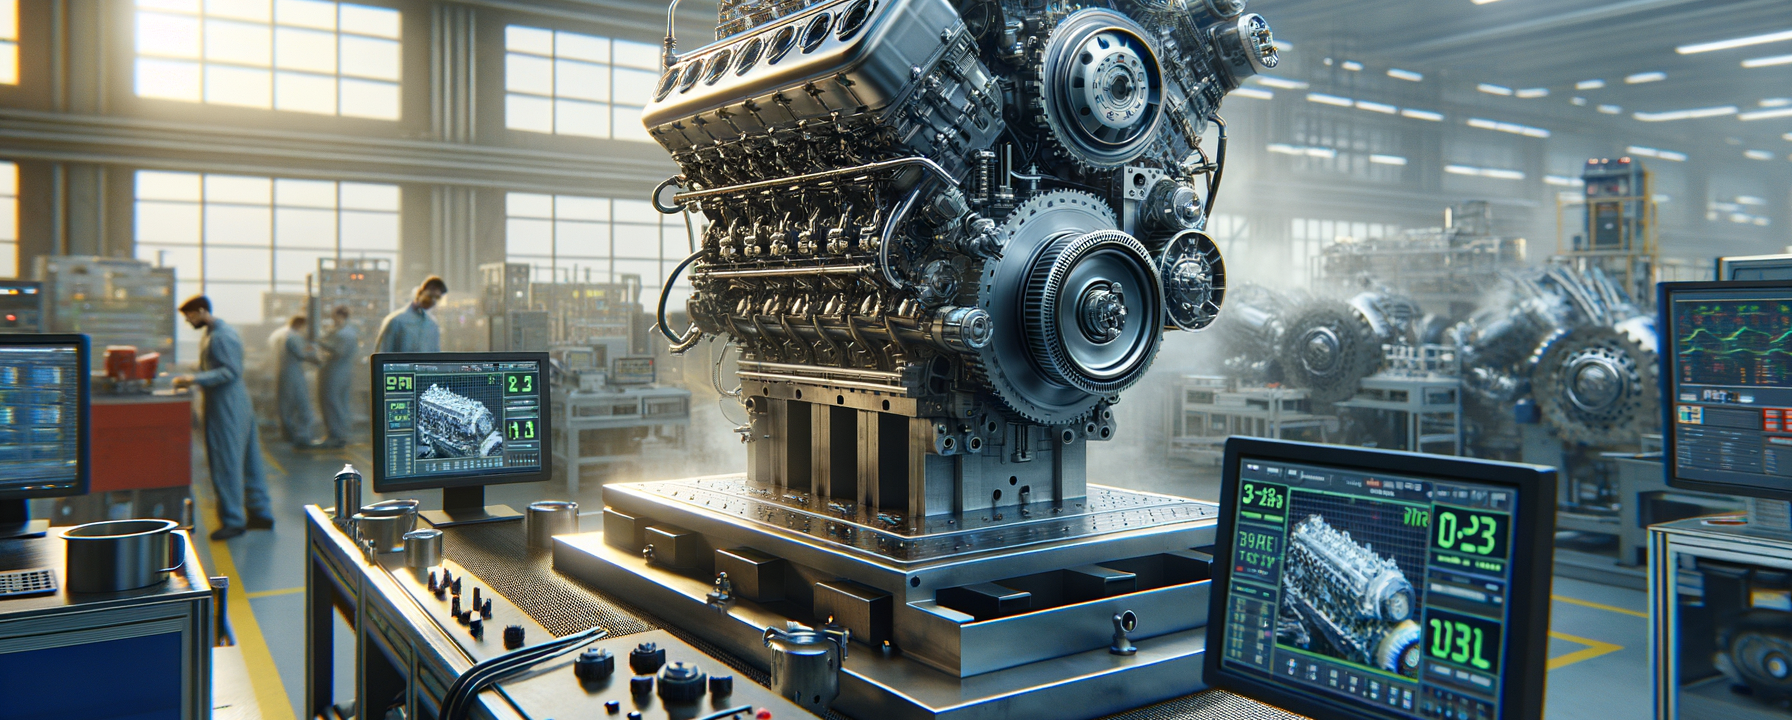 A large engine sitting on a test bench